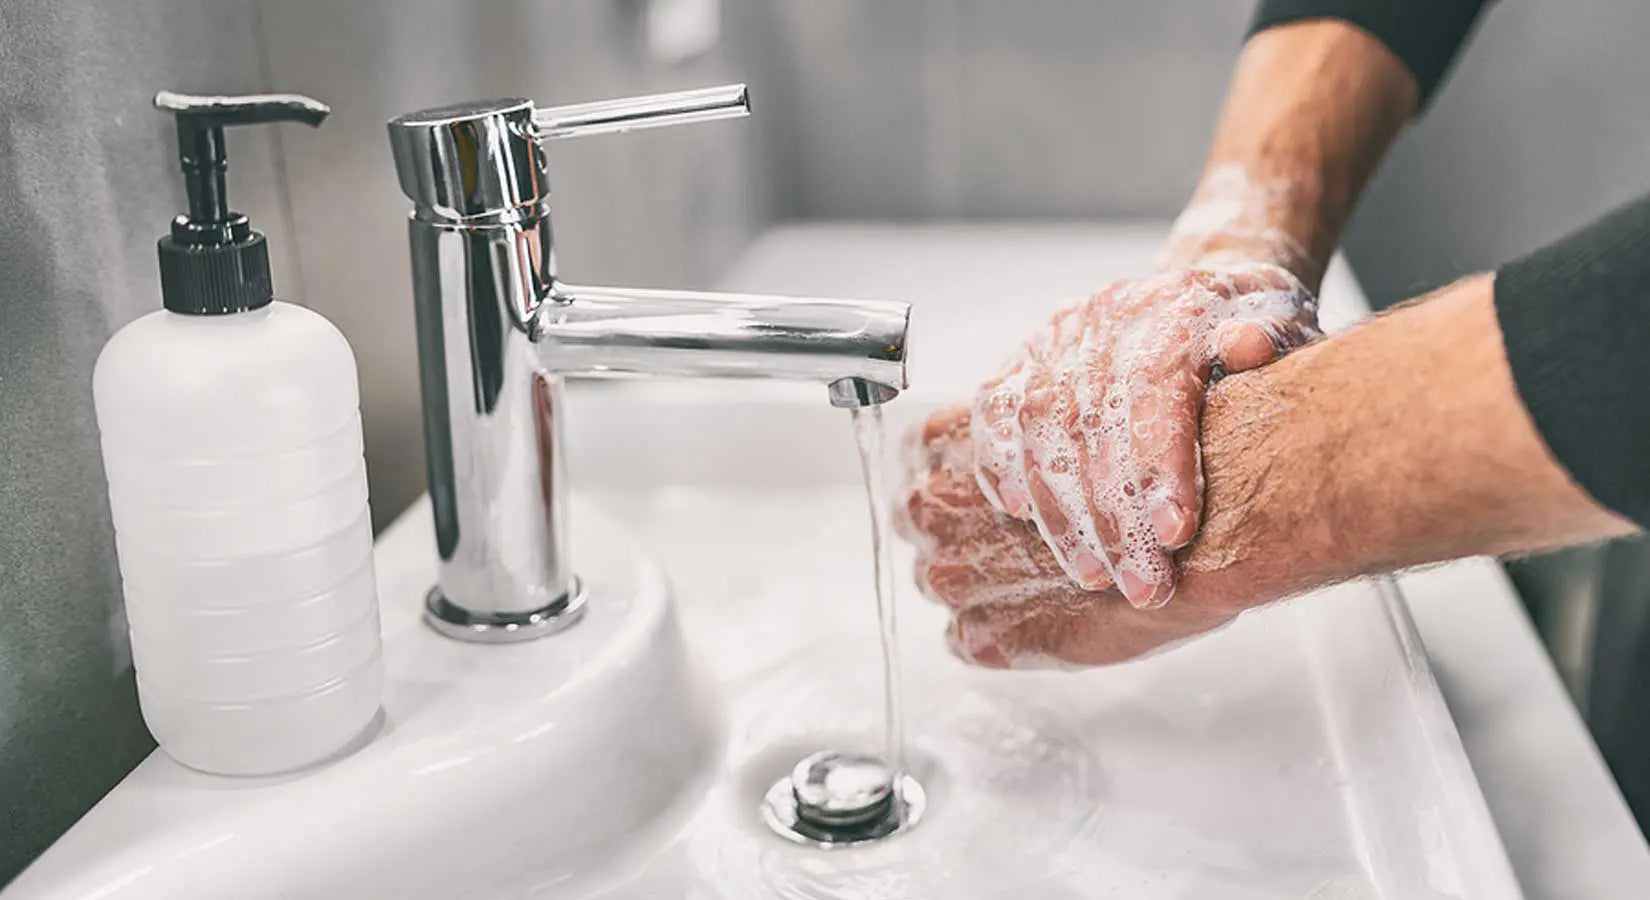 Washing Your Hands: An Easy Way To Good Health